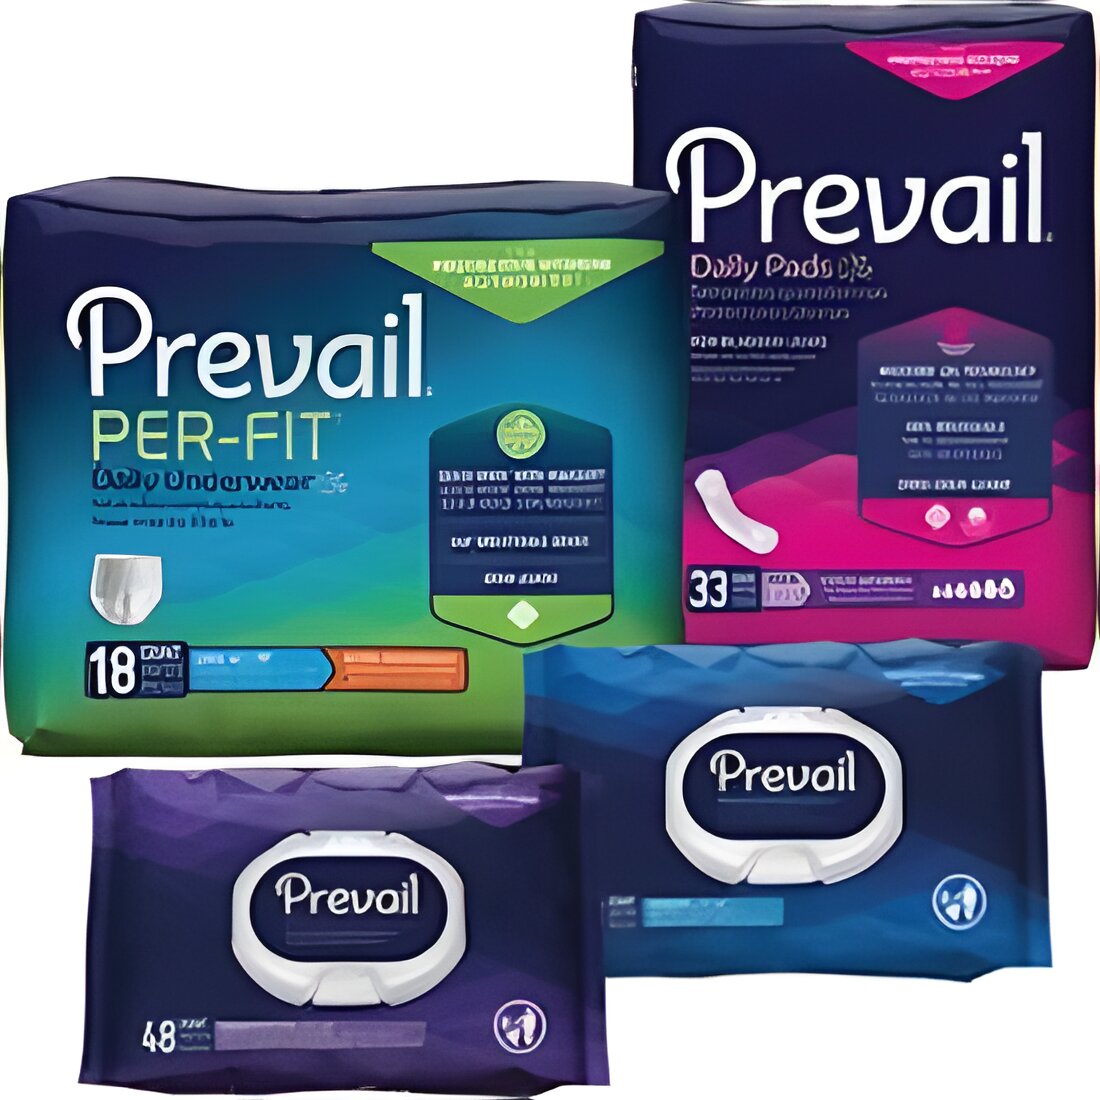 Free Prevail Incontinence Product Samples